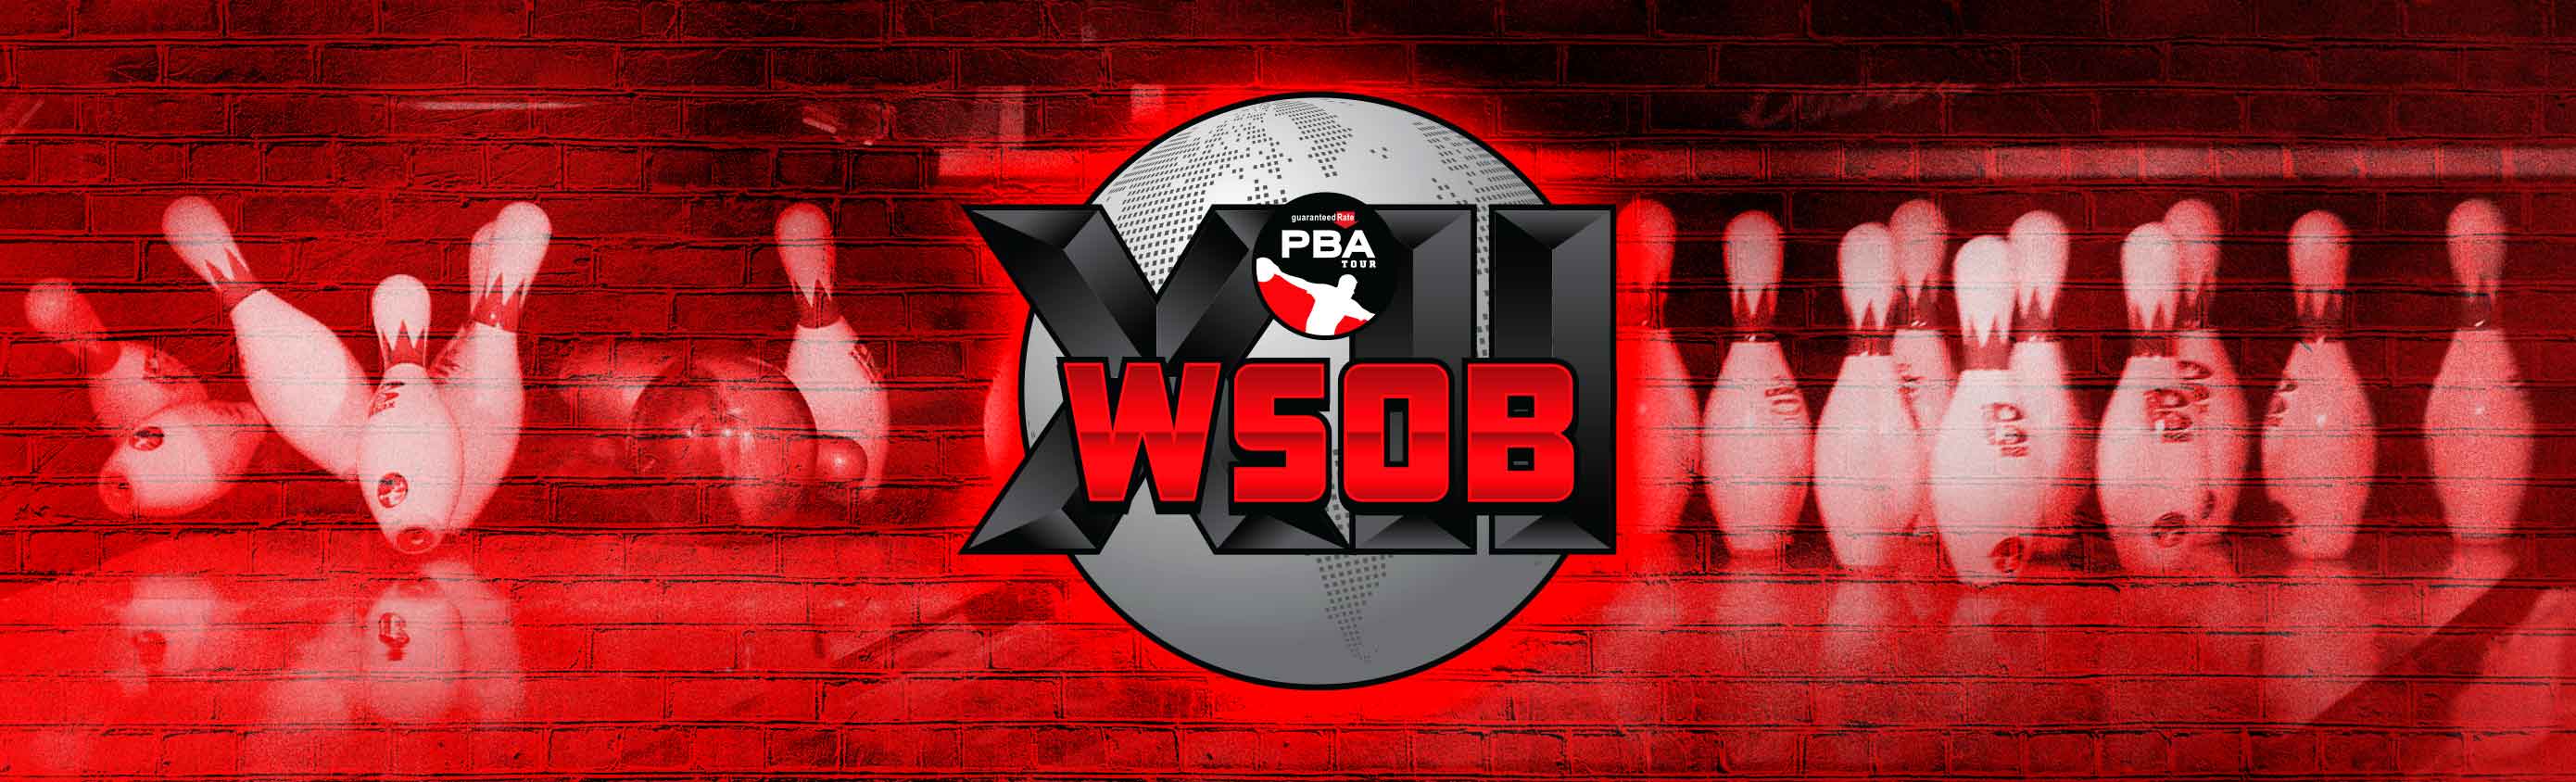 WSOB Logo with bowling pins in the background